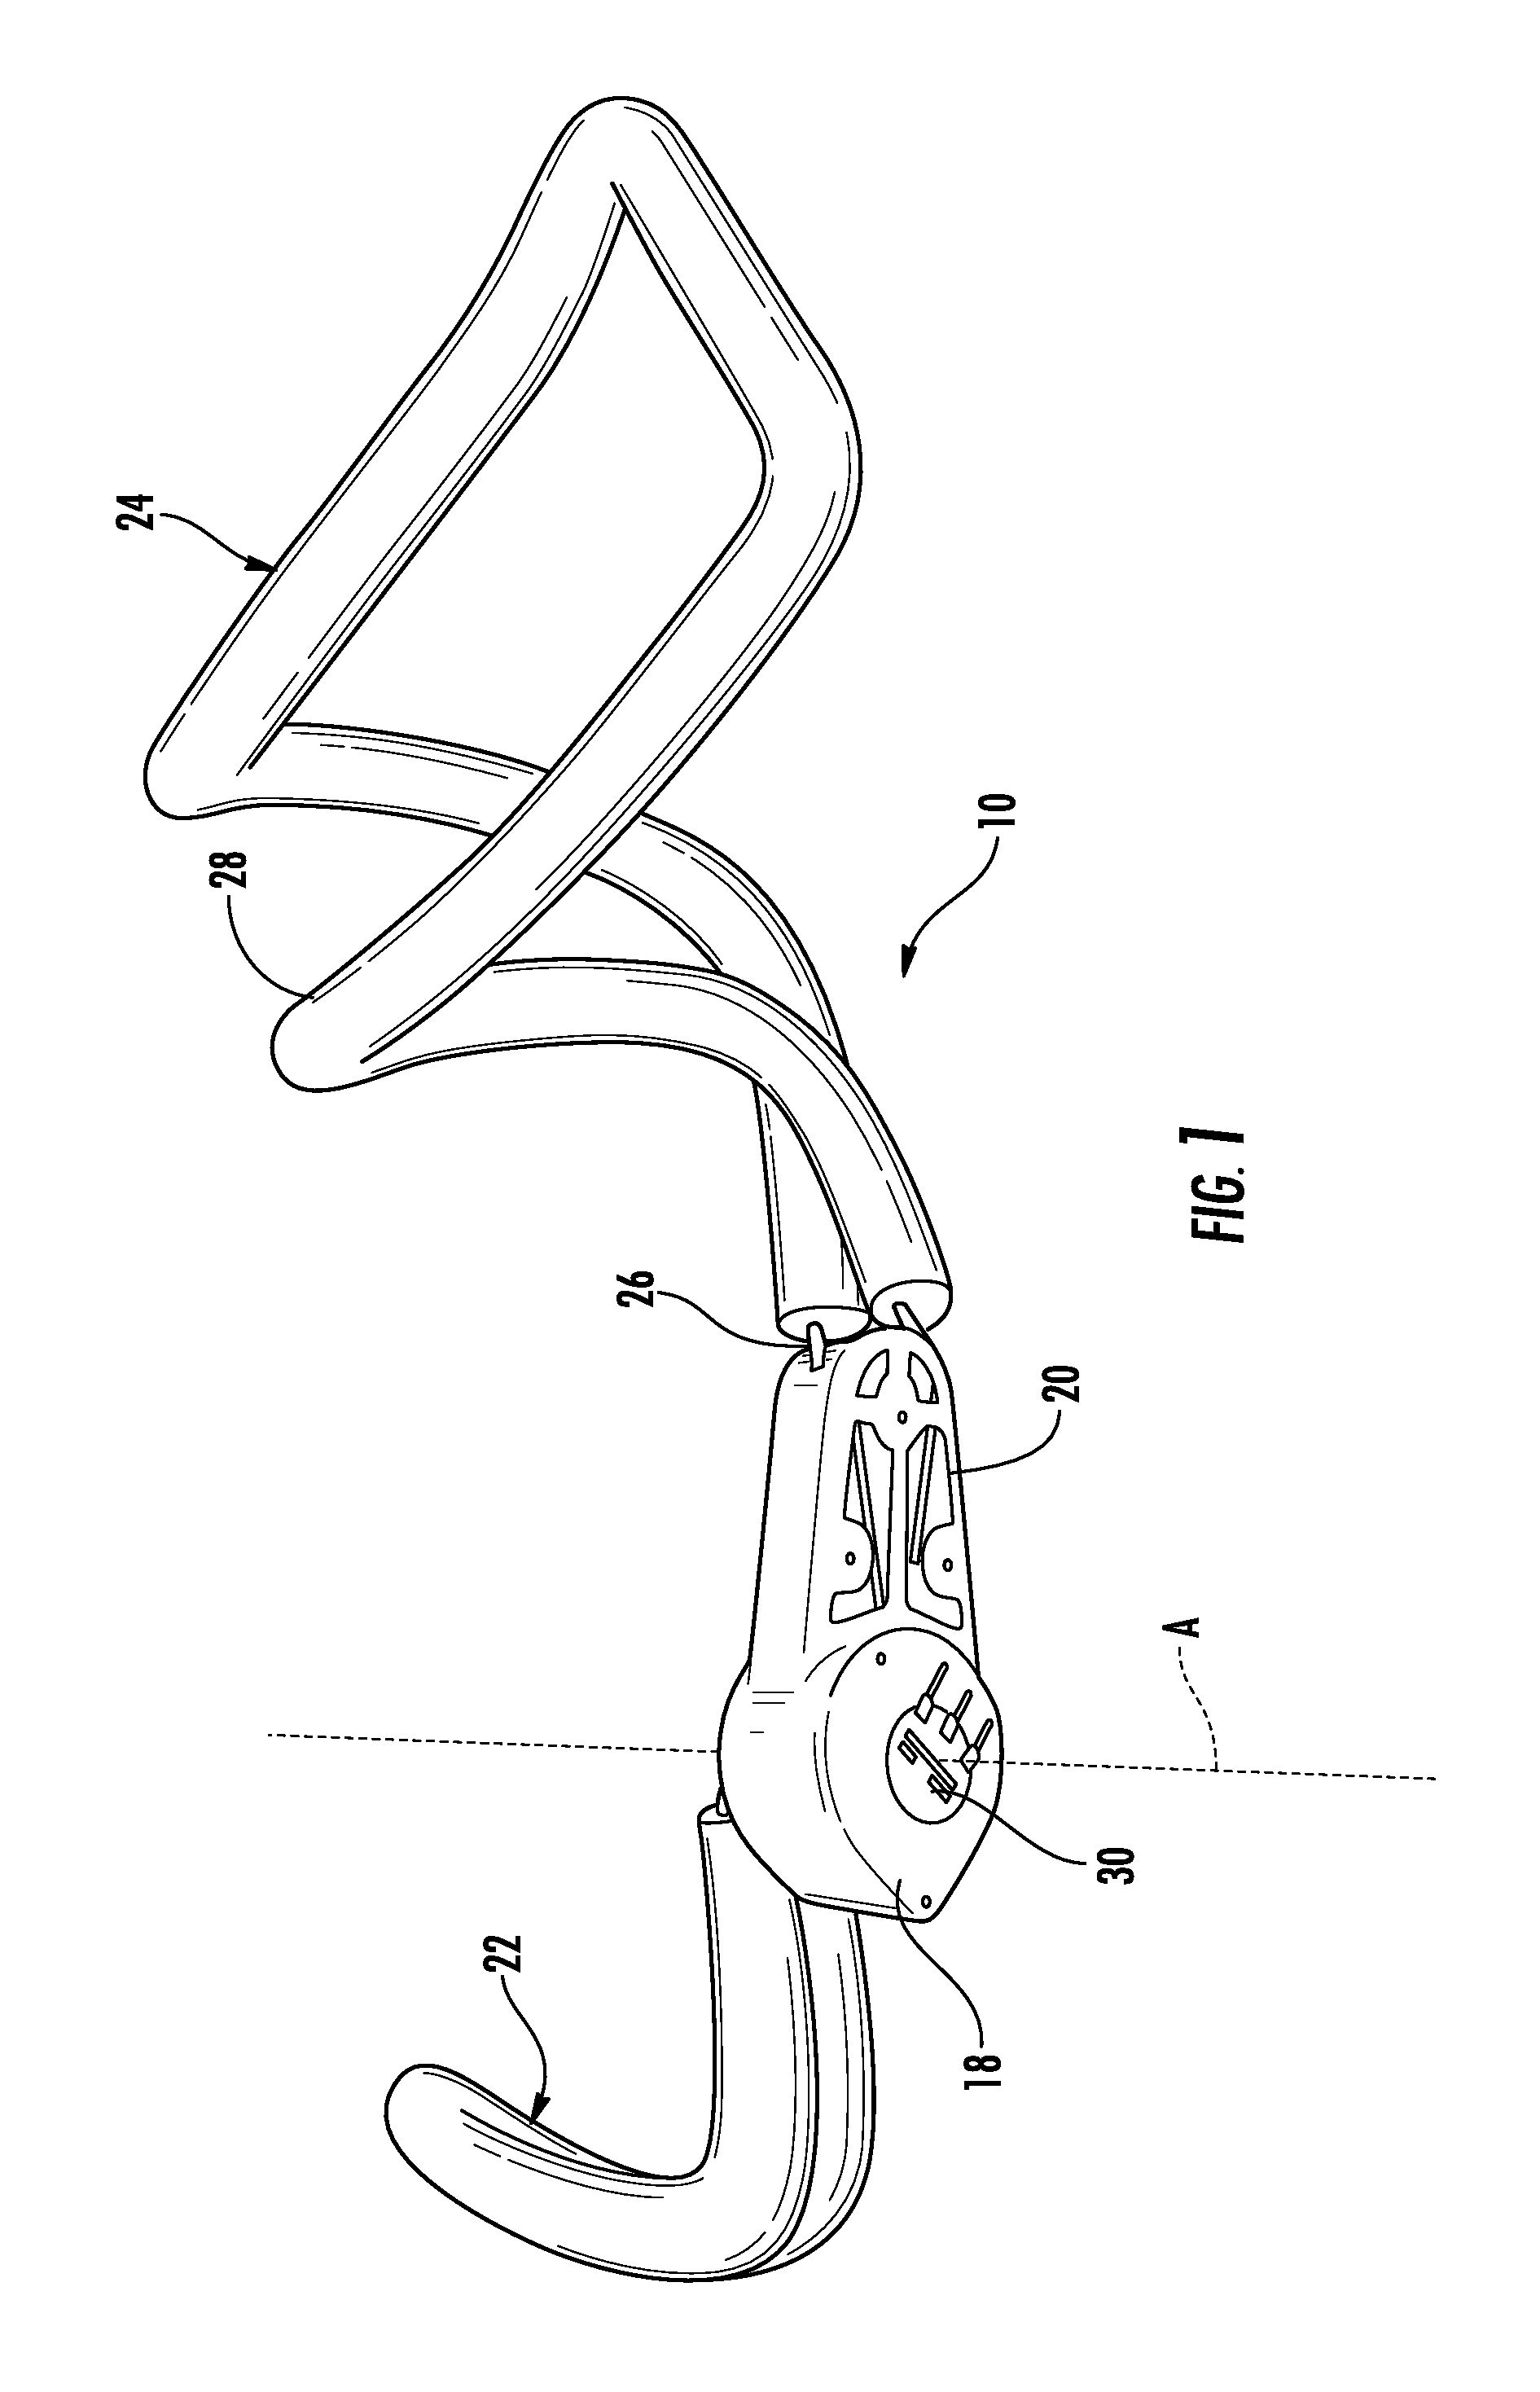 Device controller with conformable fitting system